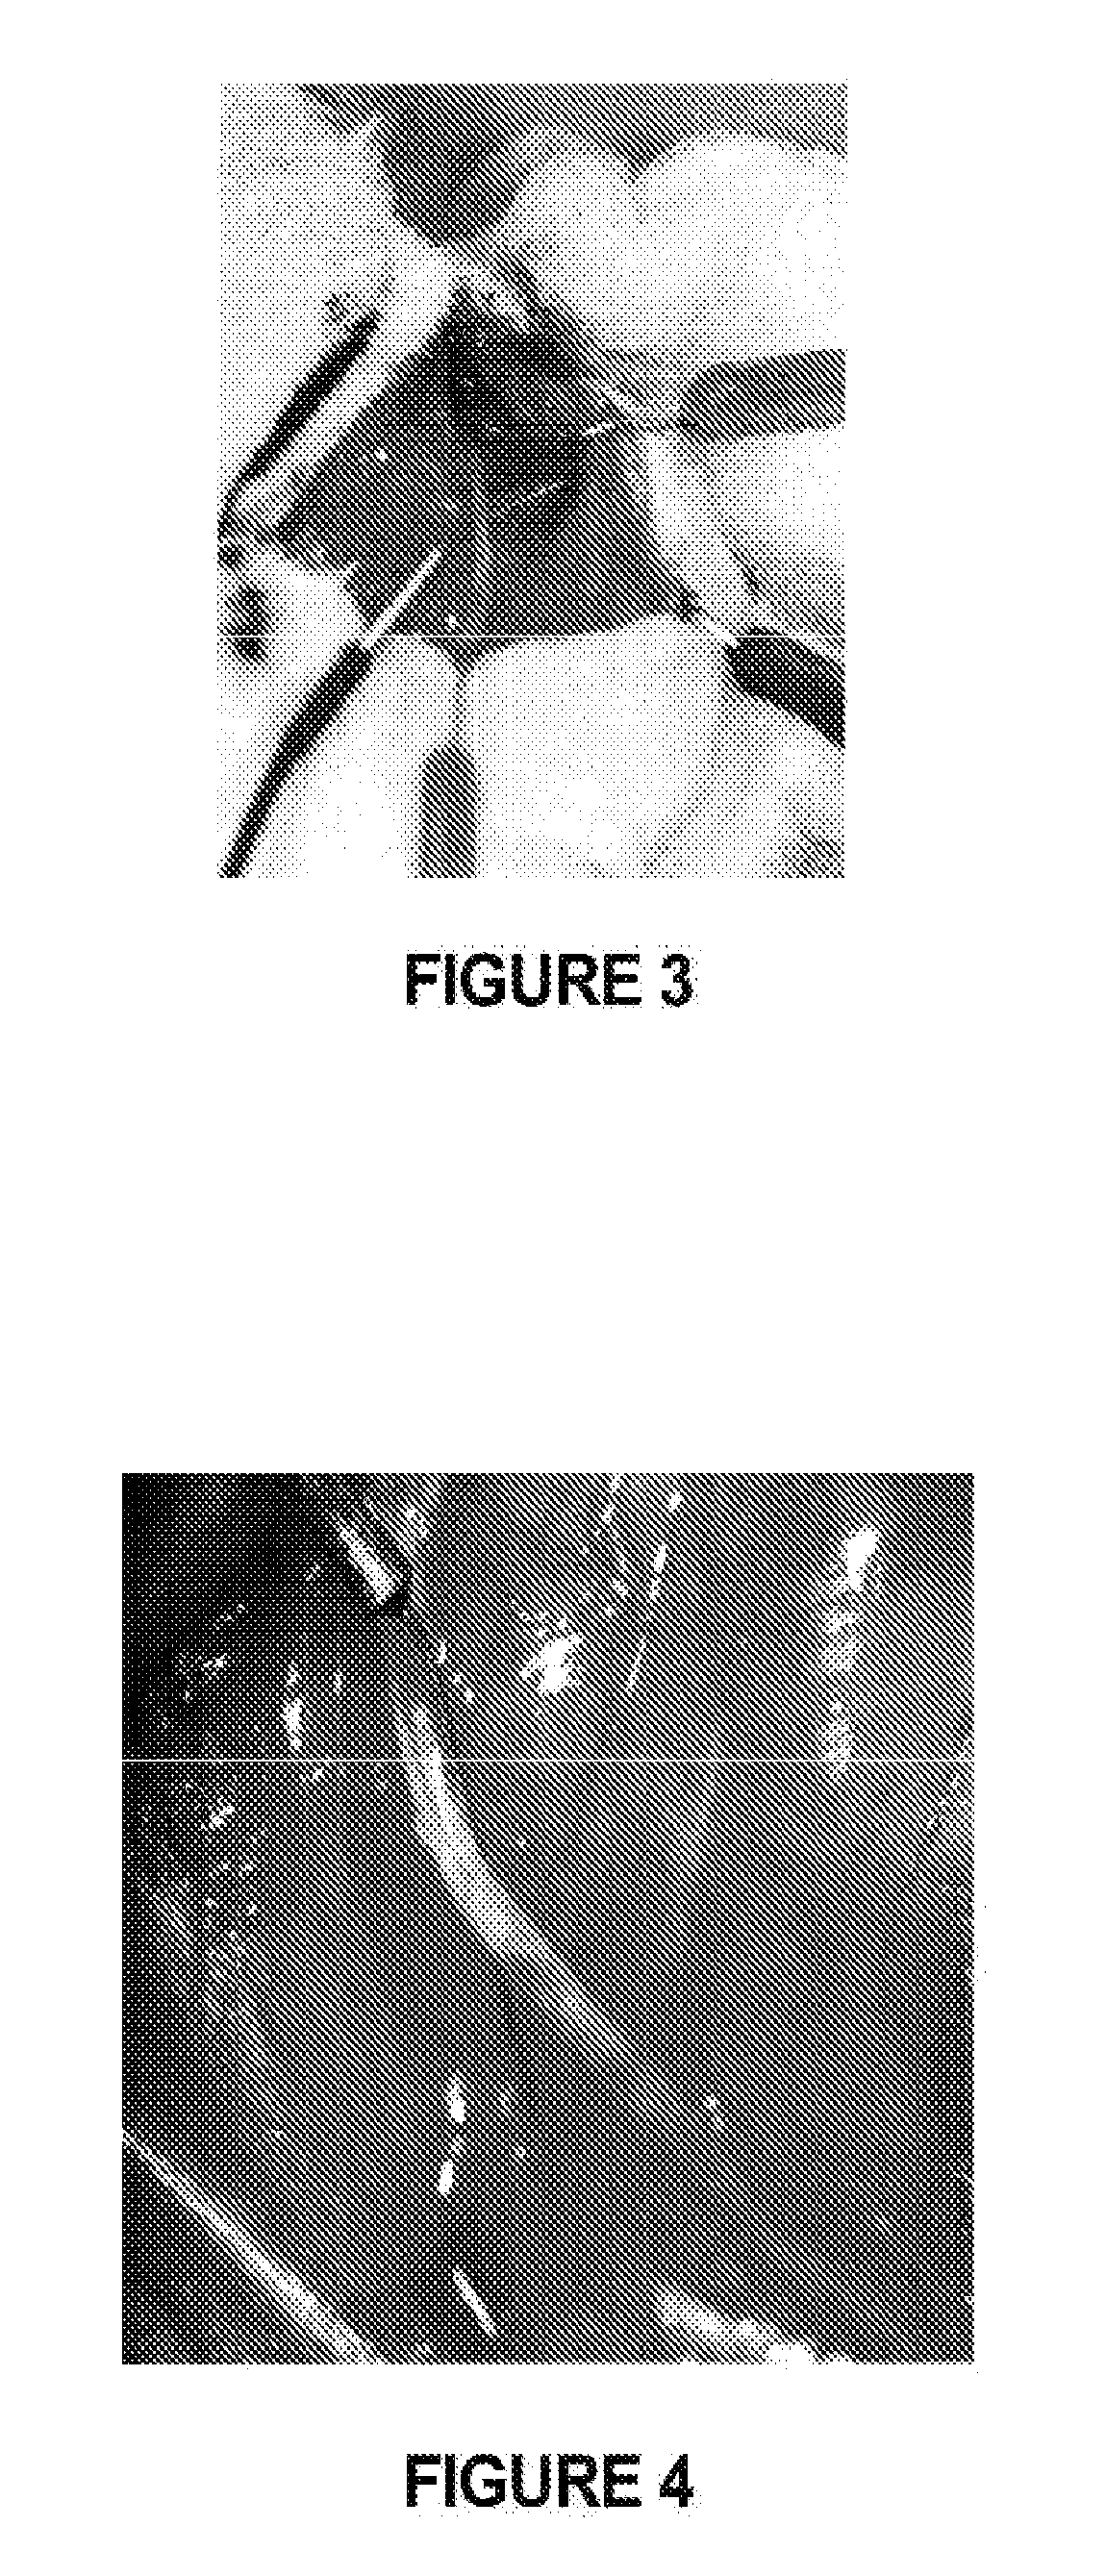 Compositions and methods for treatment of neurological disorders